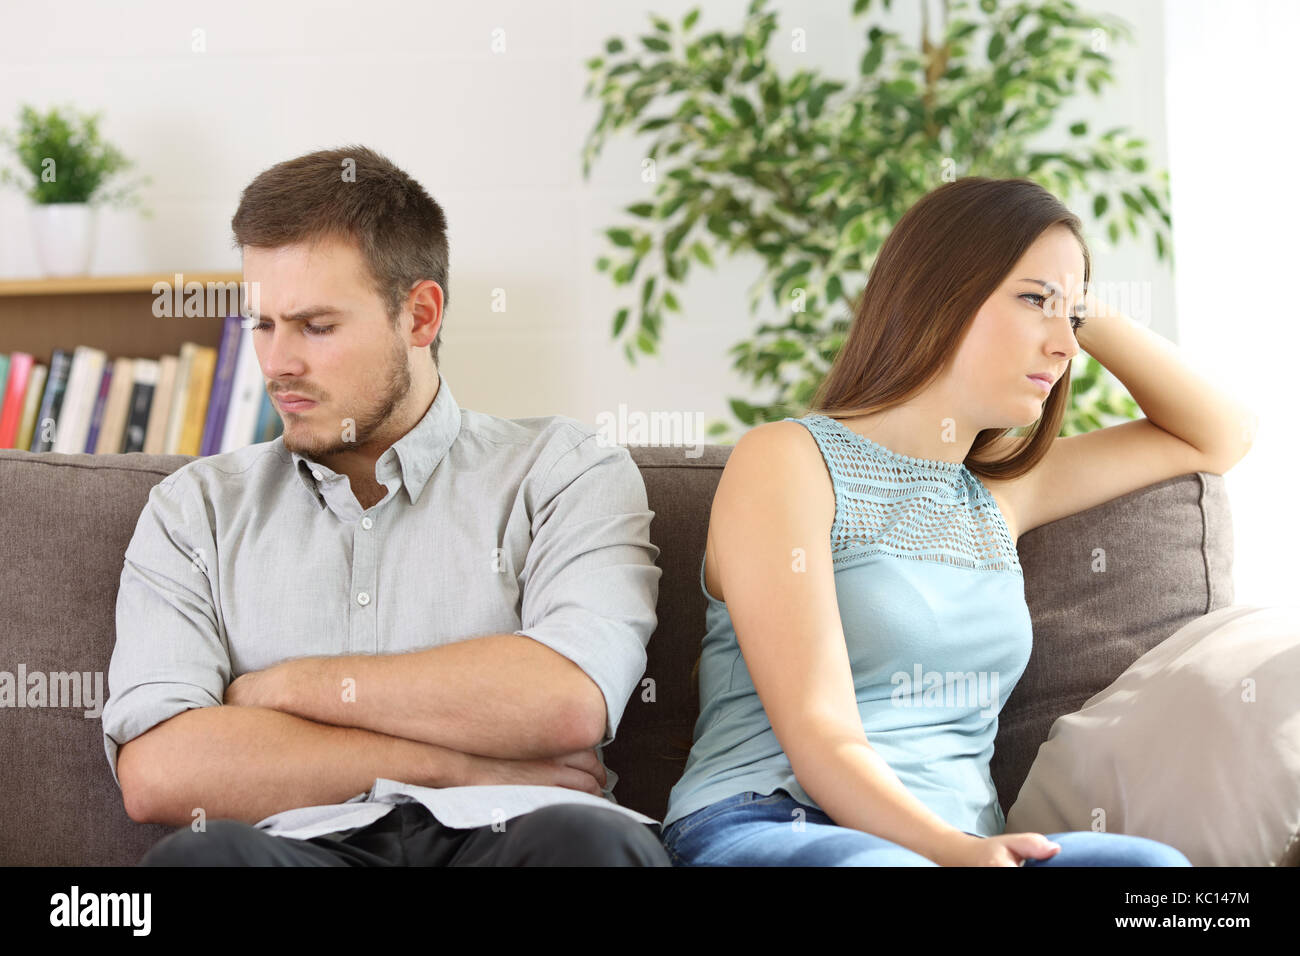 Angry couple ignoring each other after argument sitting on a sofa at home Stock Photo